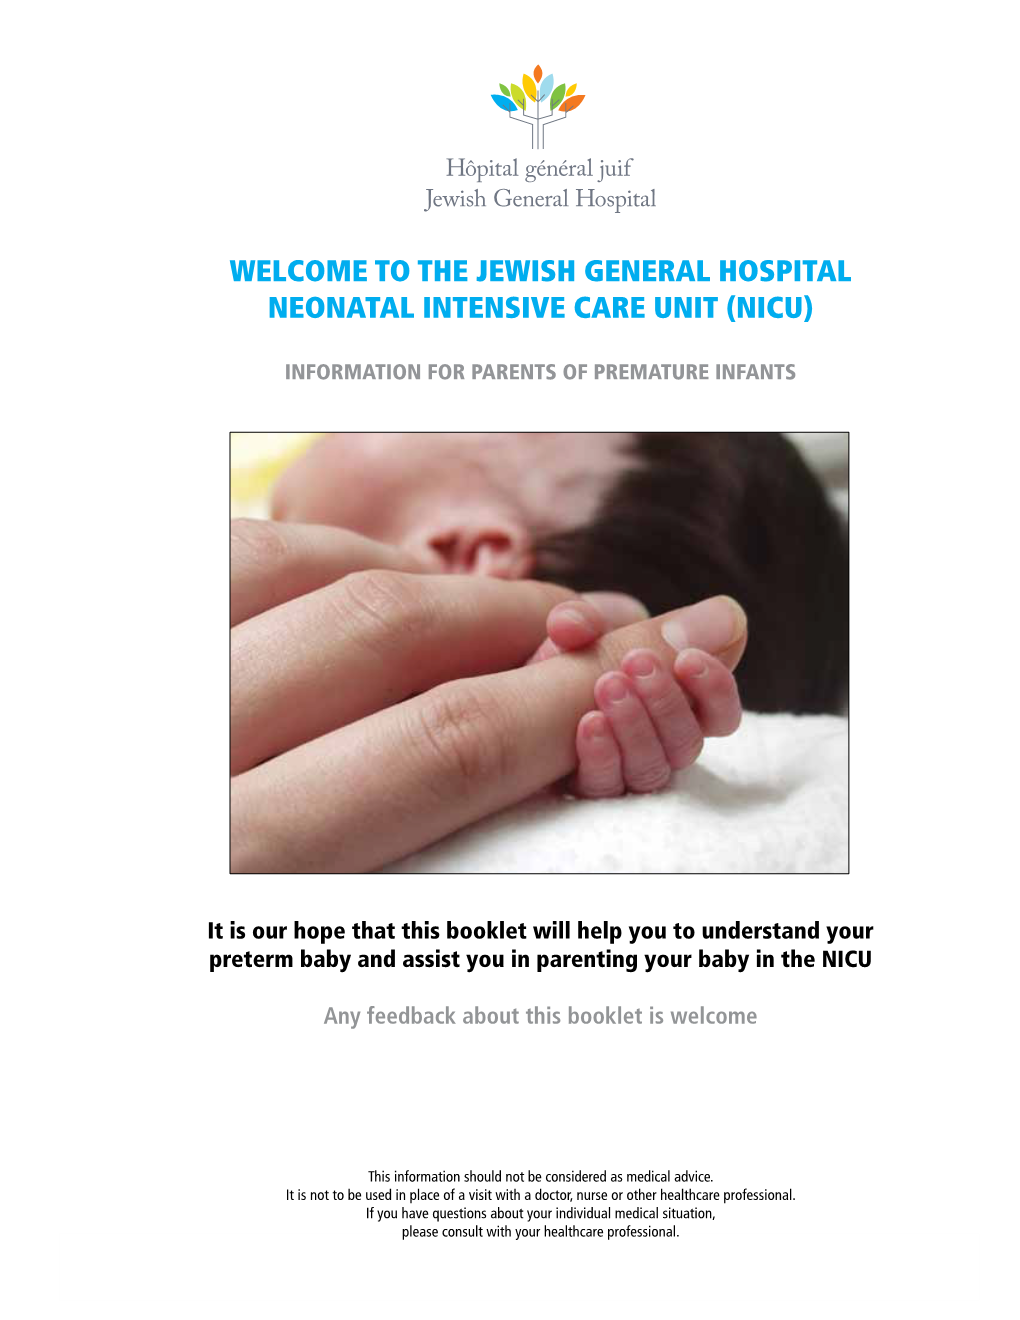 Welcome to the Jewish General Hospital Neonatal Intensive Care Unit (Nicu)